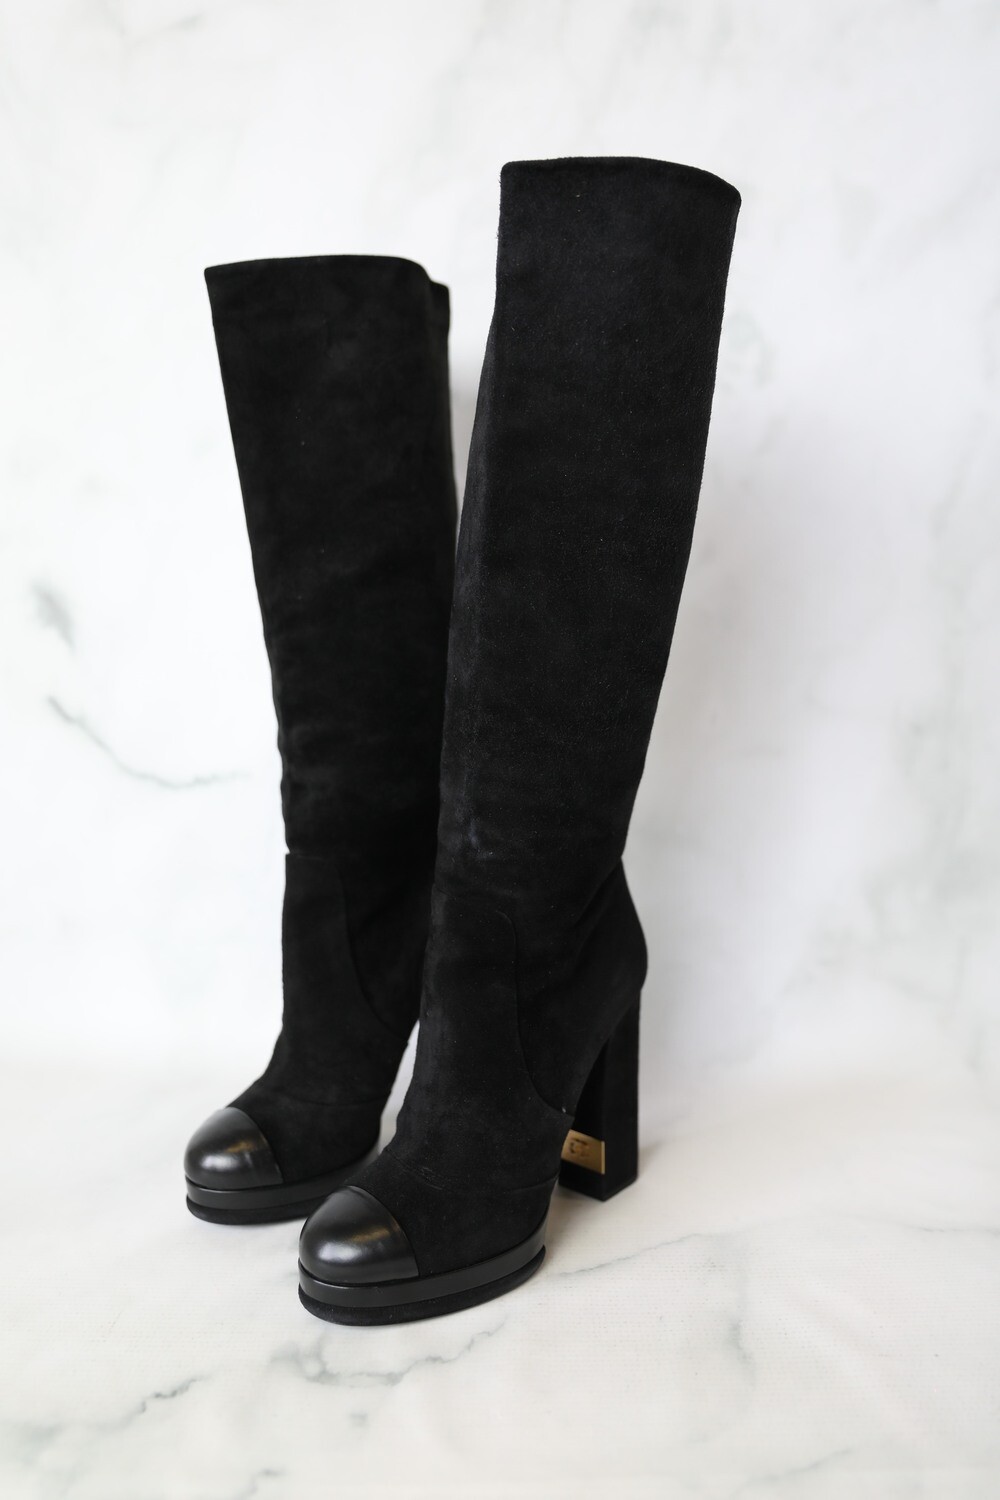 Chanel Shoes Tall Boots with Heels, Black Suede, Size 38, New in Box WA001